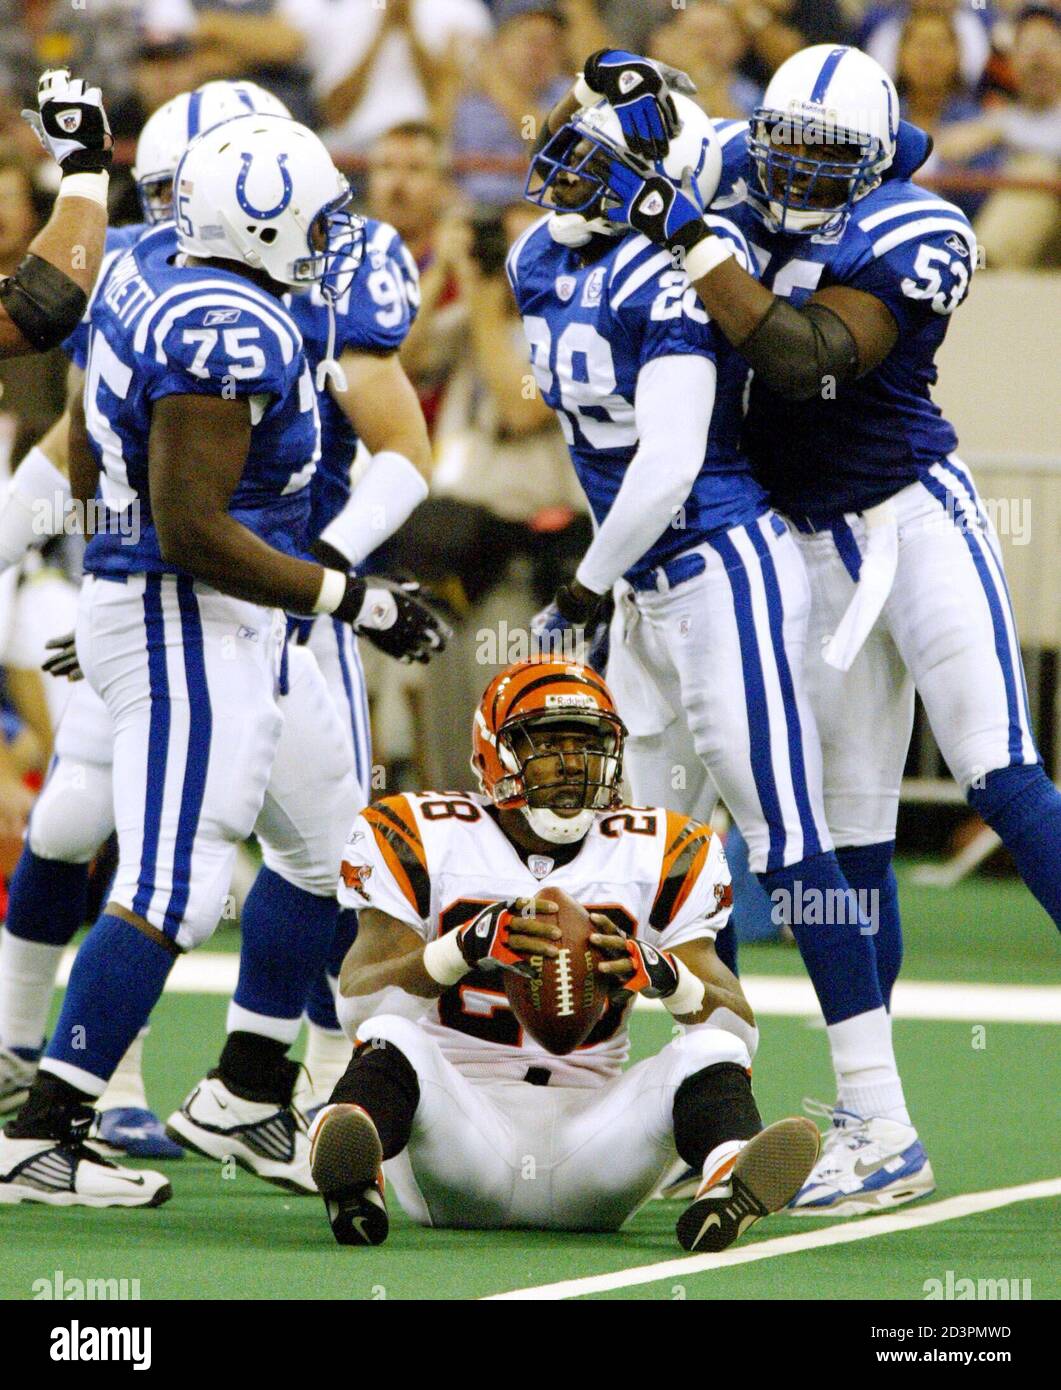 Indianapolis Colts' players Larry Tripplett (75), Idrees Bashir (28) and Marcus Washington (53) celebrate after bringing down Cincinnati Bengals' running back Corey Dillon (with ball) for a loss, October 6, 2002 at the RCA Dome in Indianapolis during first quarter NFL play. REUTERS/Brent Smith  BS/HB Stock Photo